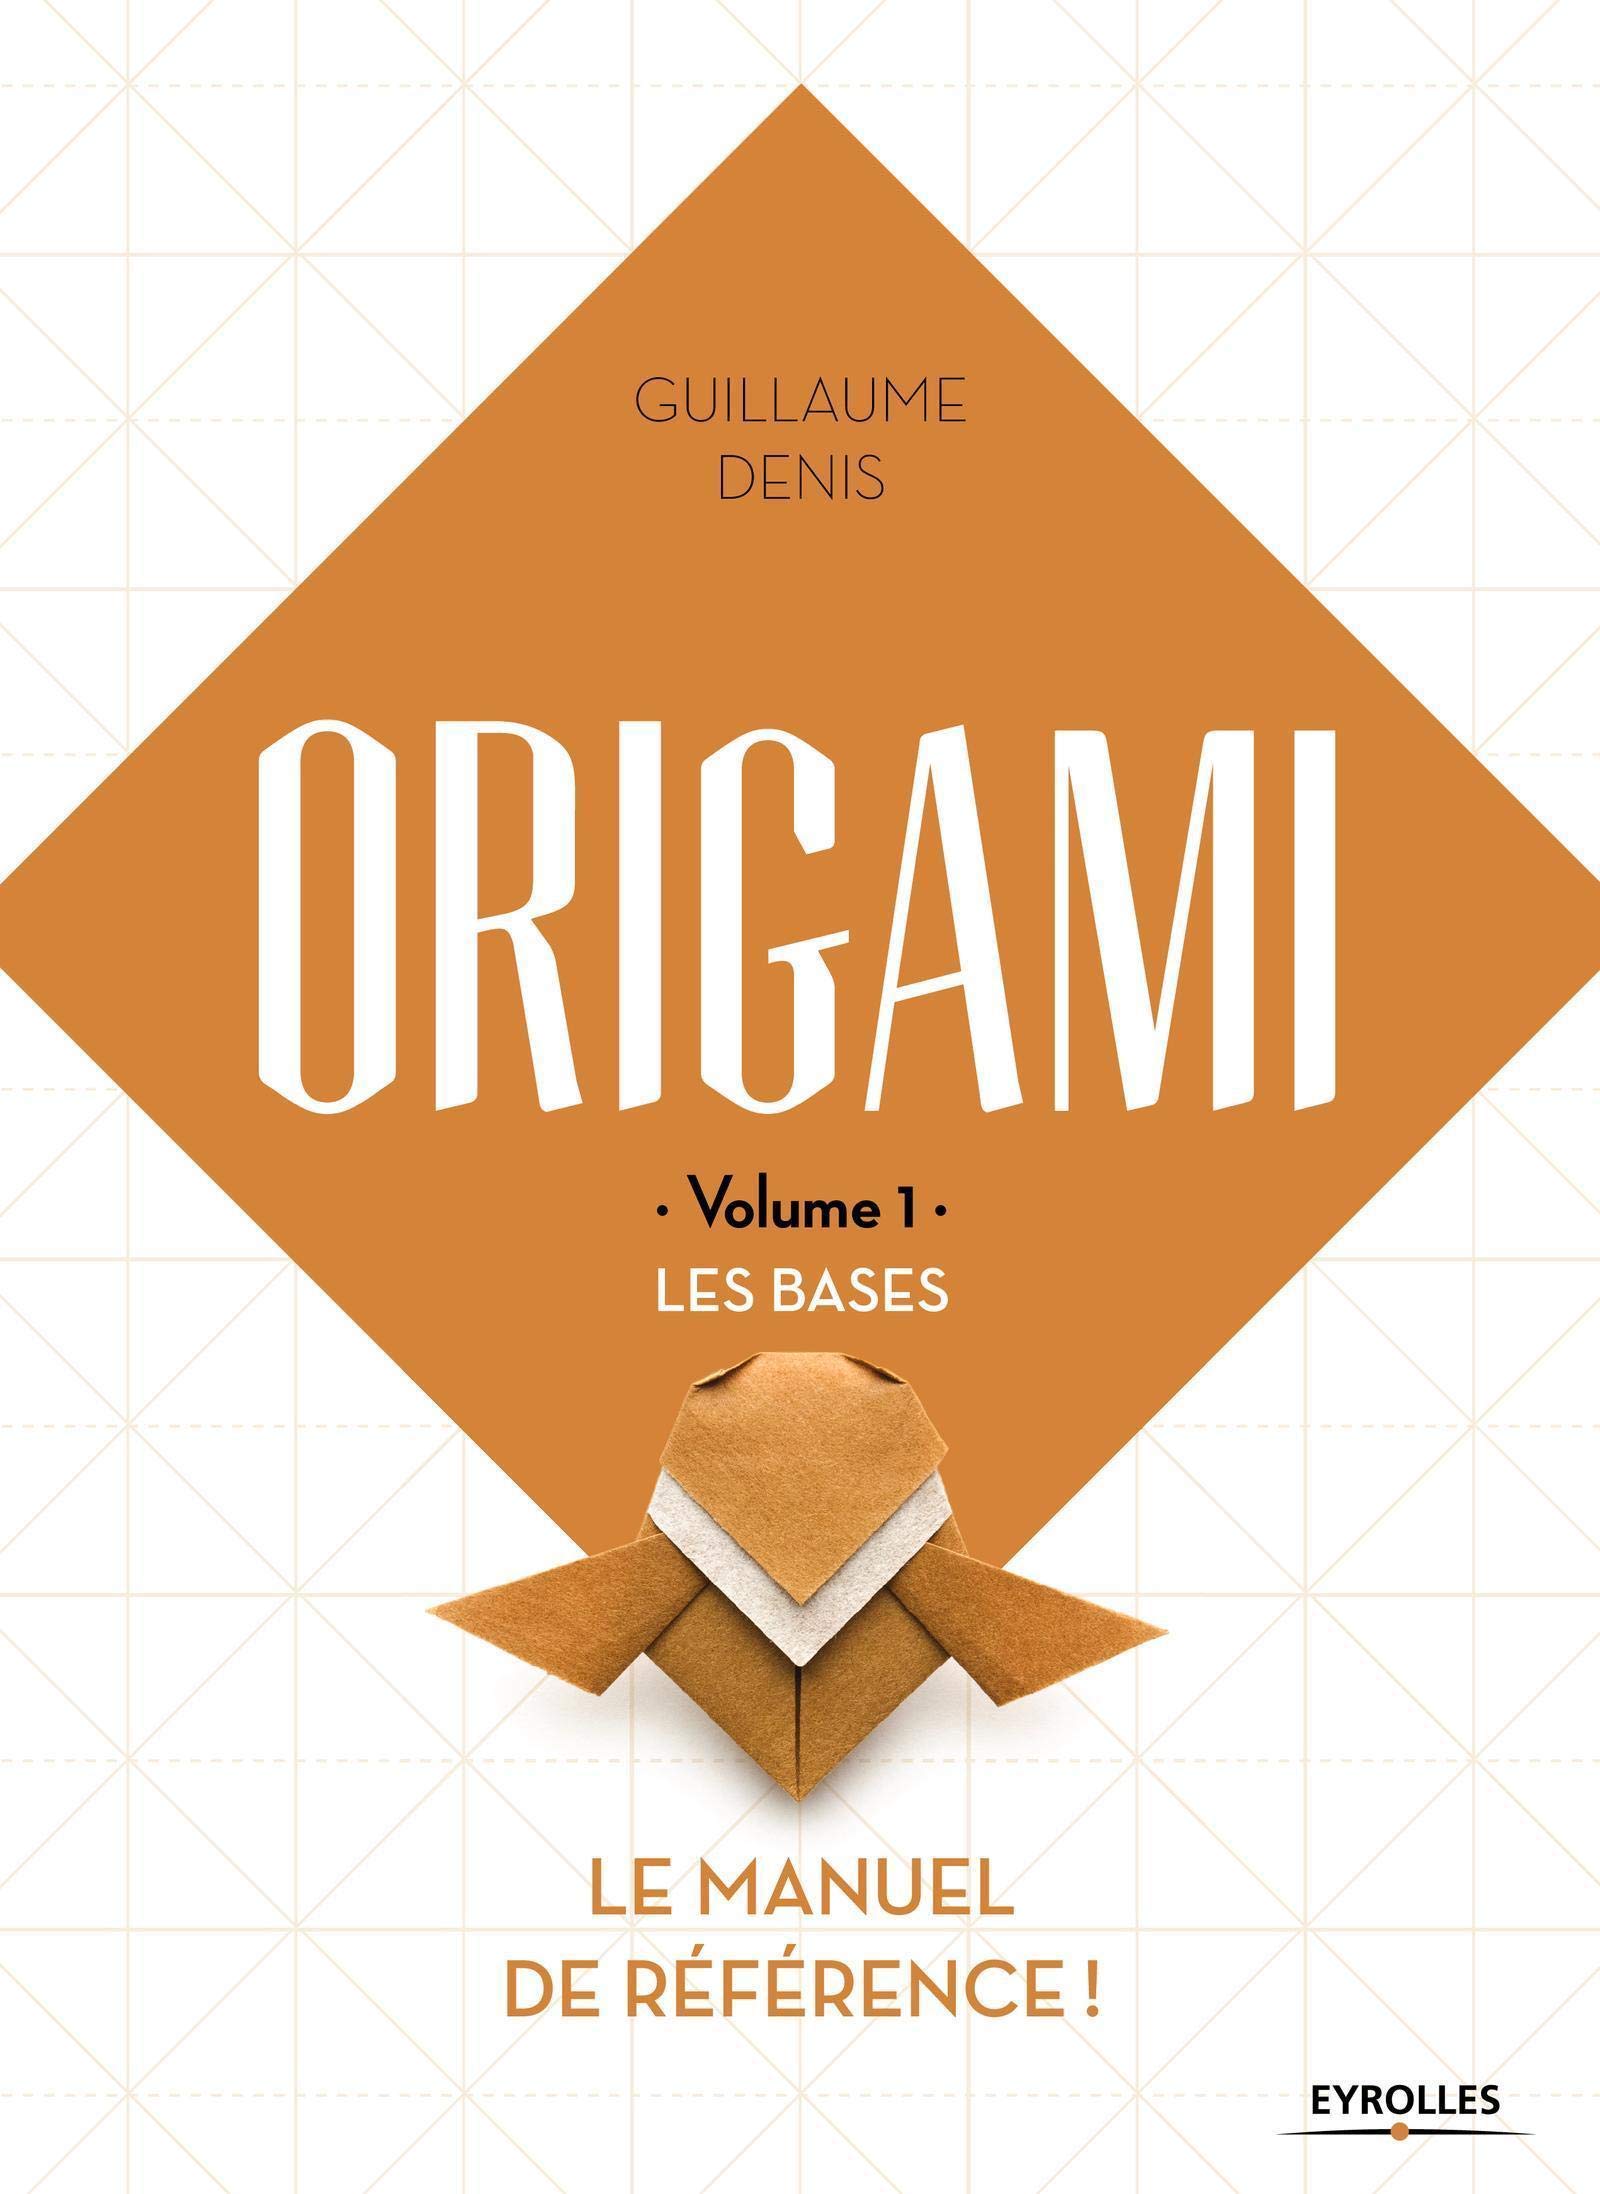 ORIGAMI - Volume 1 - LES BASES : page 166.